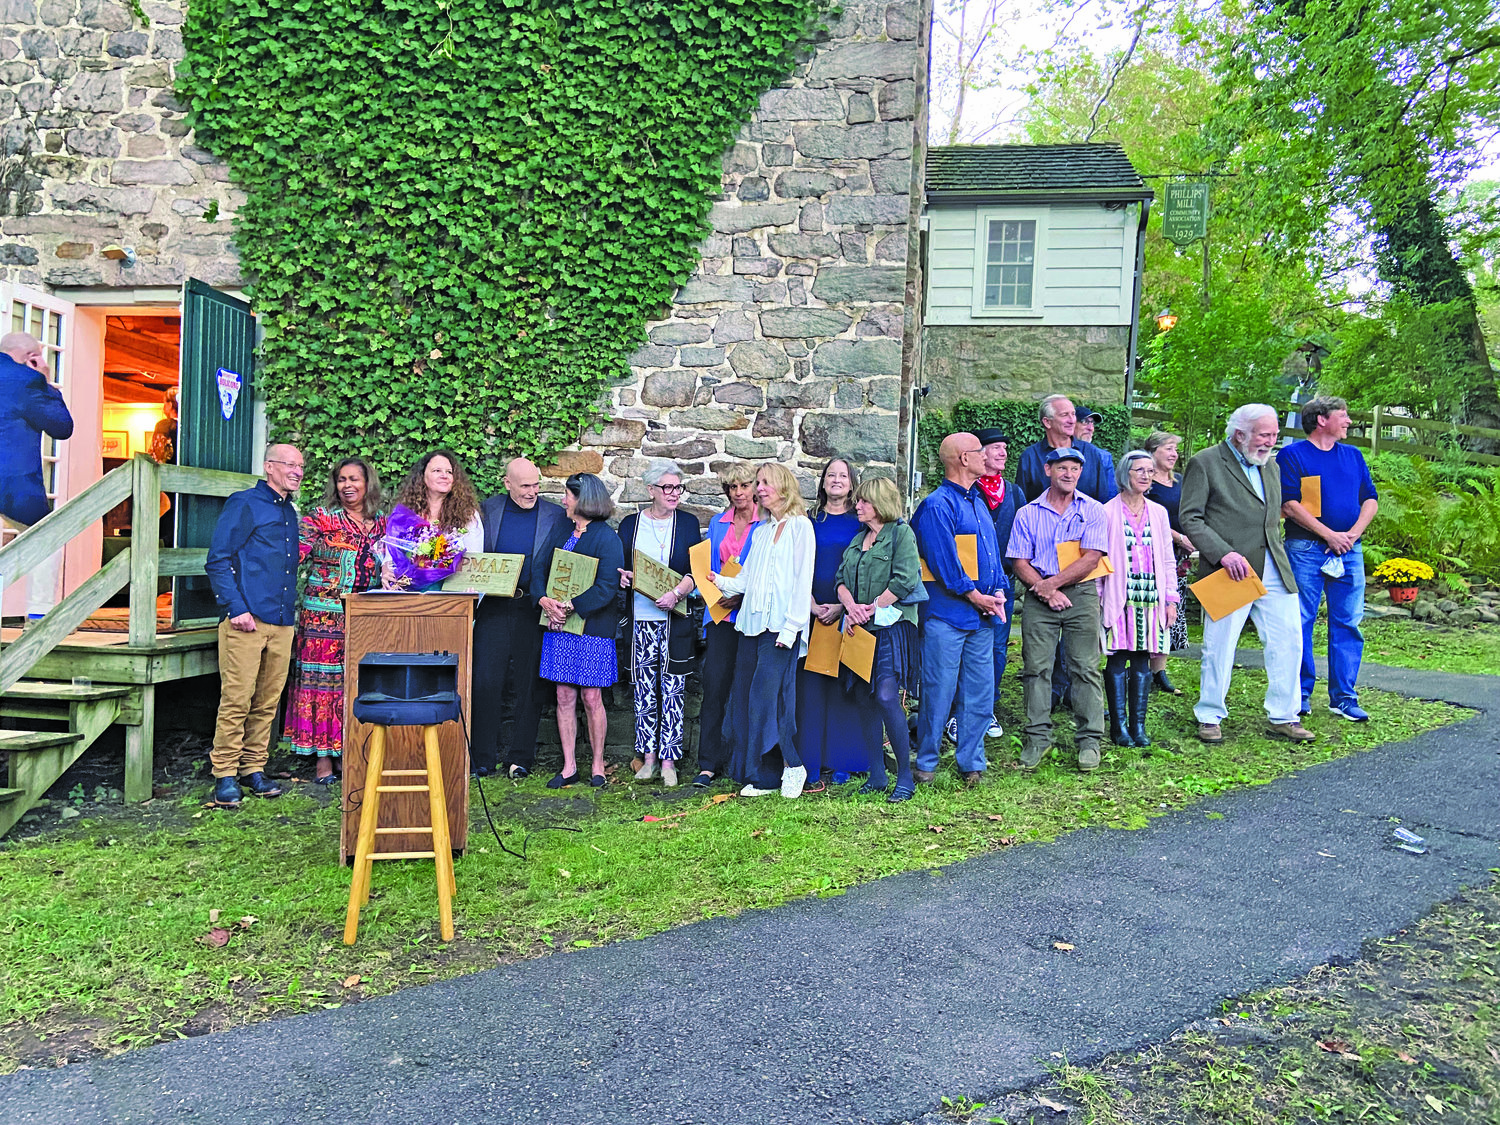 Awards were presented to 16 artists at the opening reception of the 92nd Juried Art Show at Phillips’ Mill.